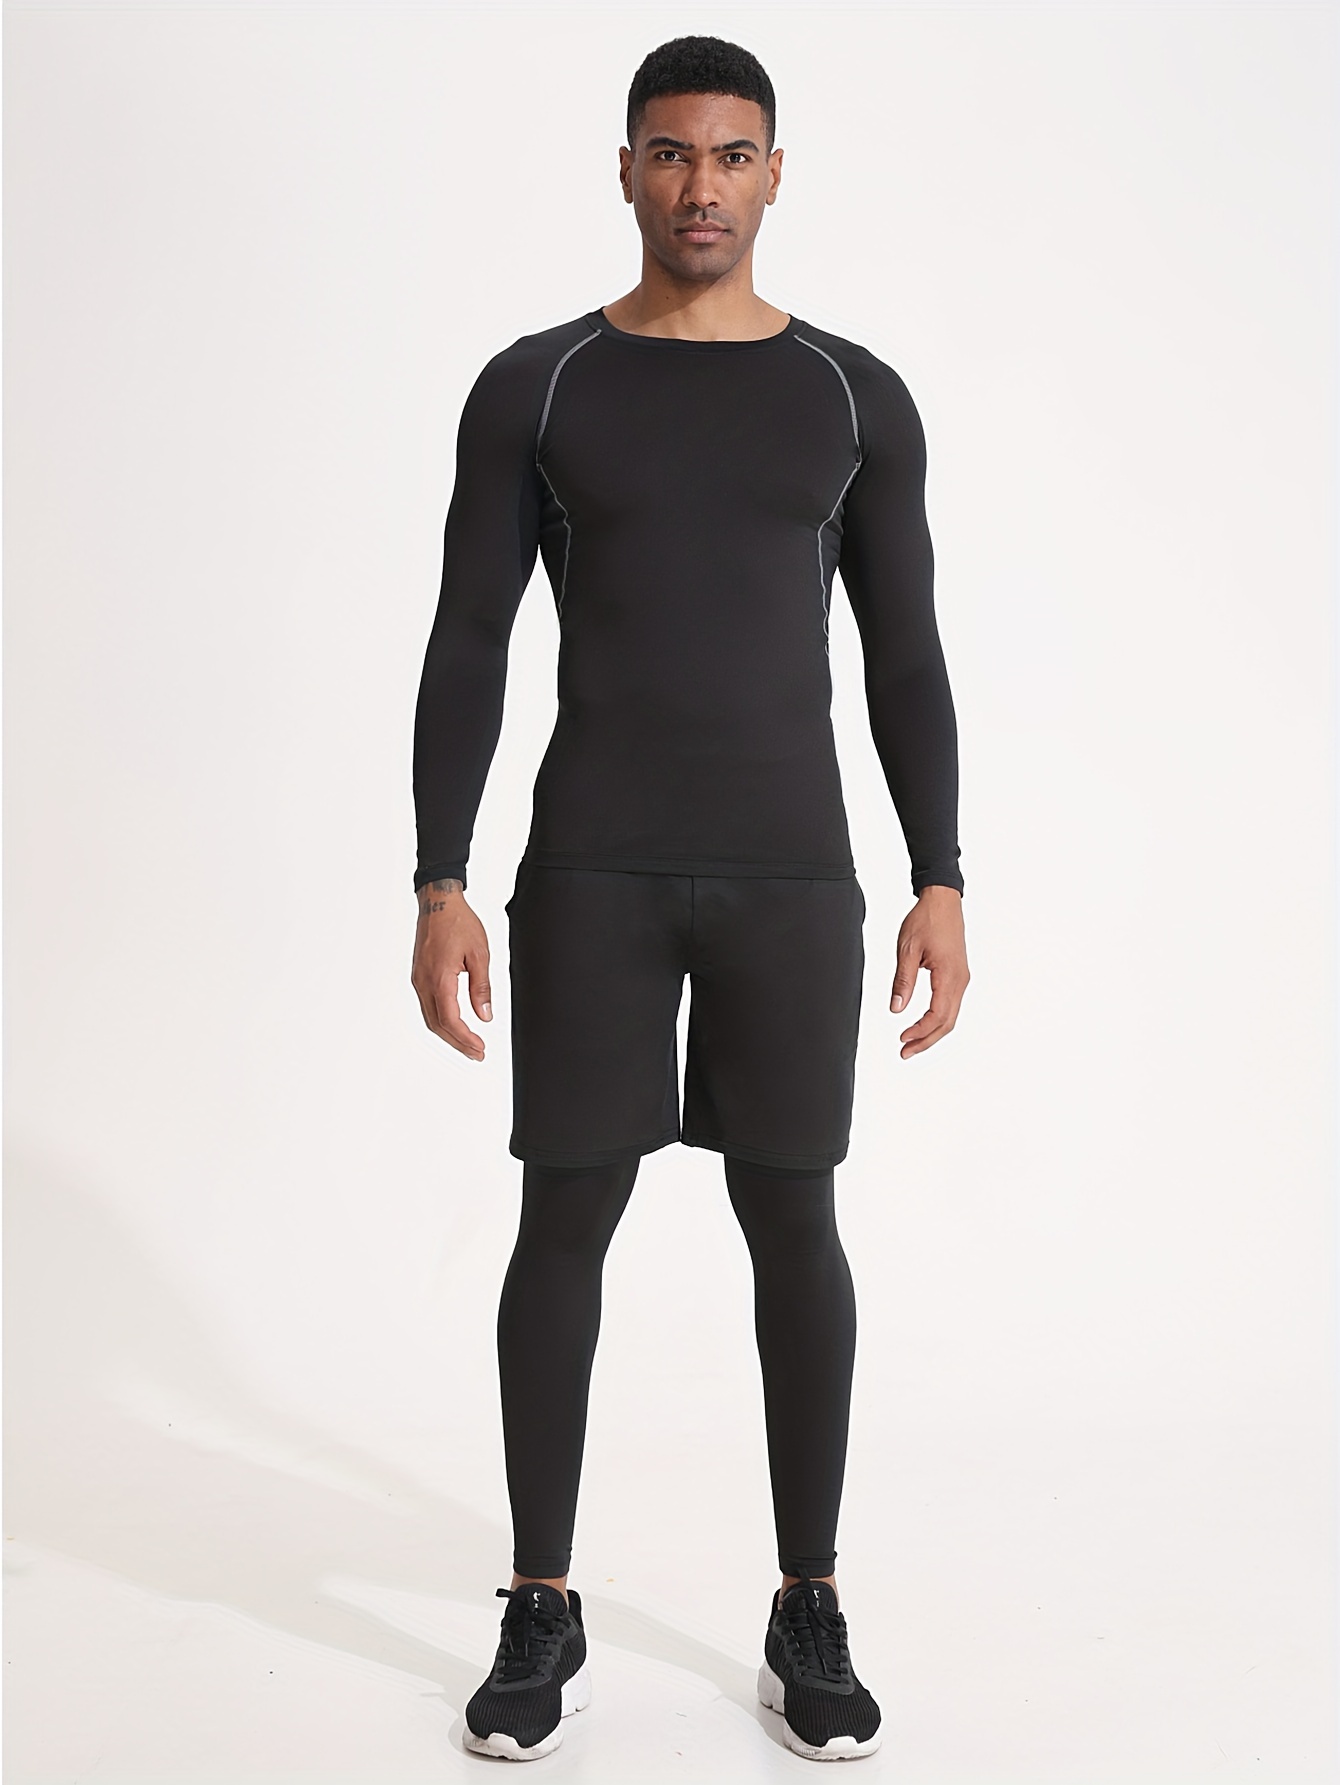 Mens Quick Drying Compression Basketball Football Pants With Stretchy  Bottom And Cropped Design For Trendy Sports Training Single Leg From Jkokk,  $14.05